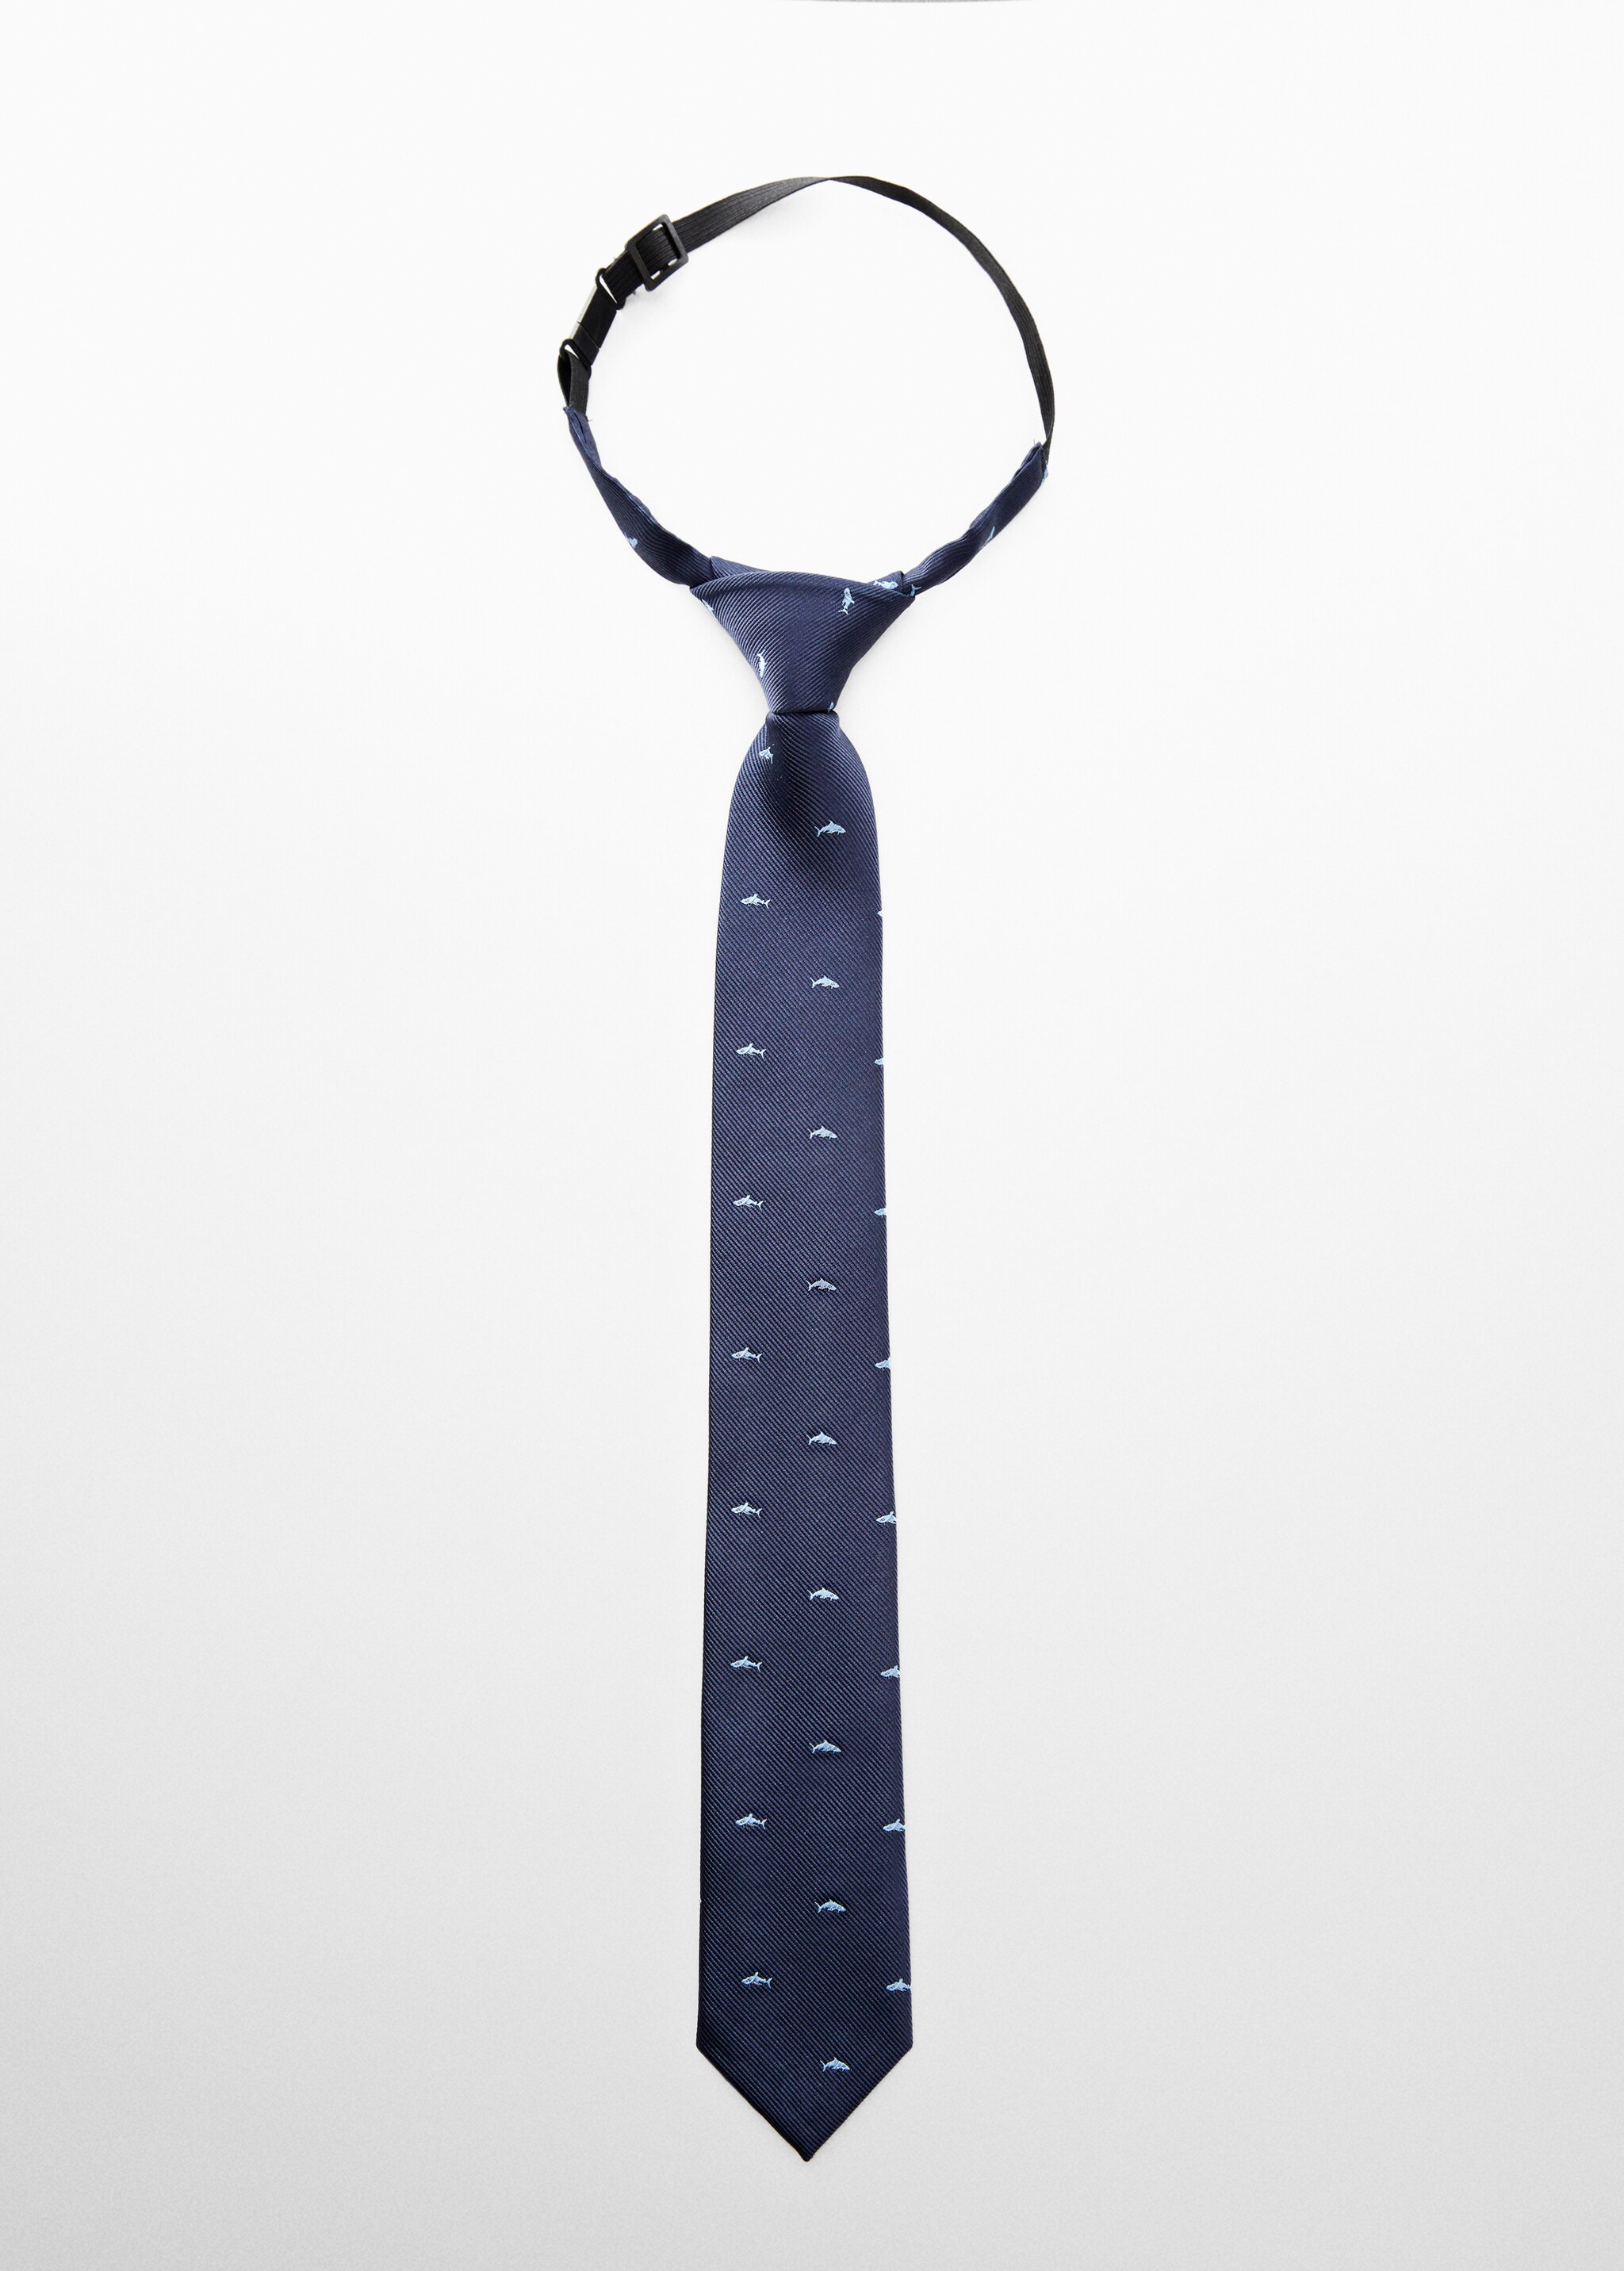 Printed tie - Article without model